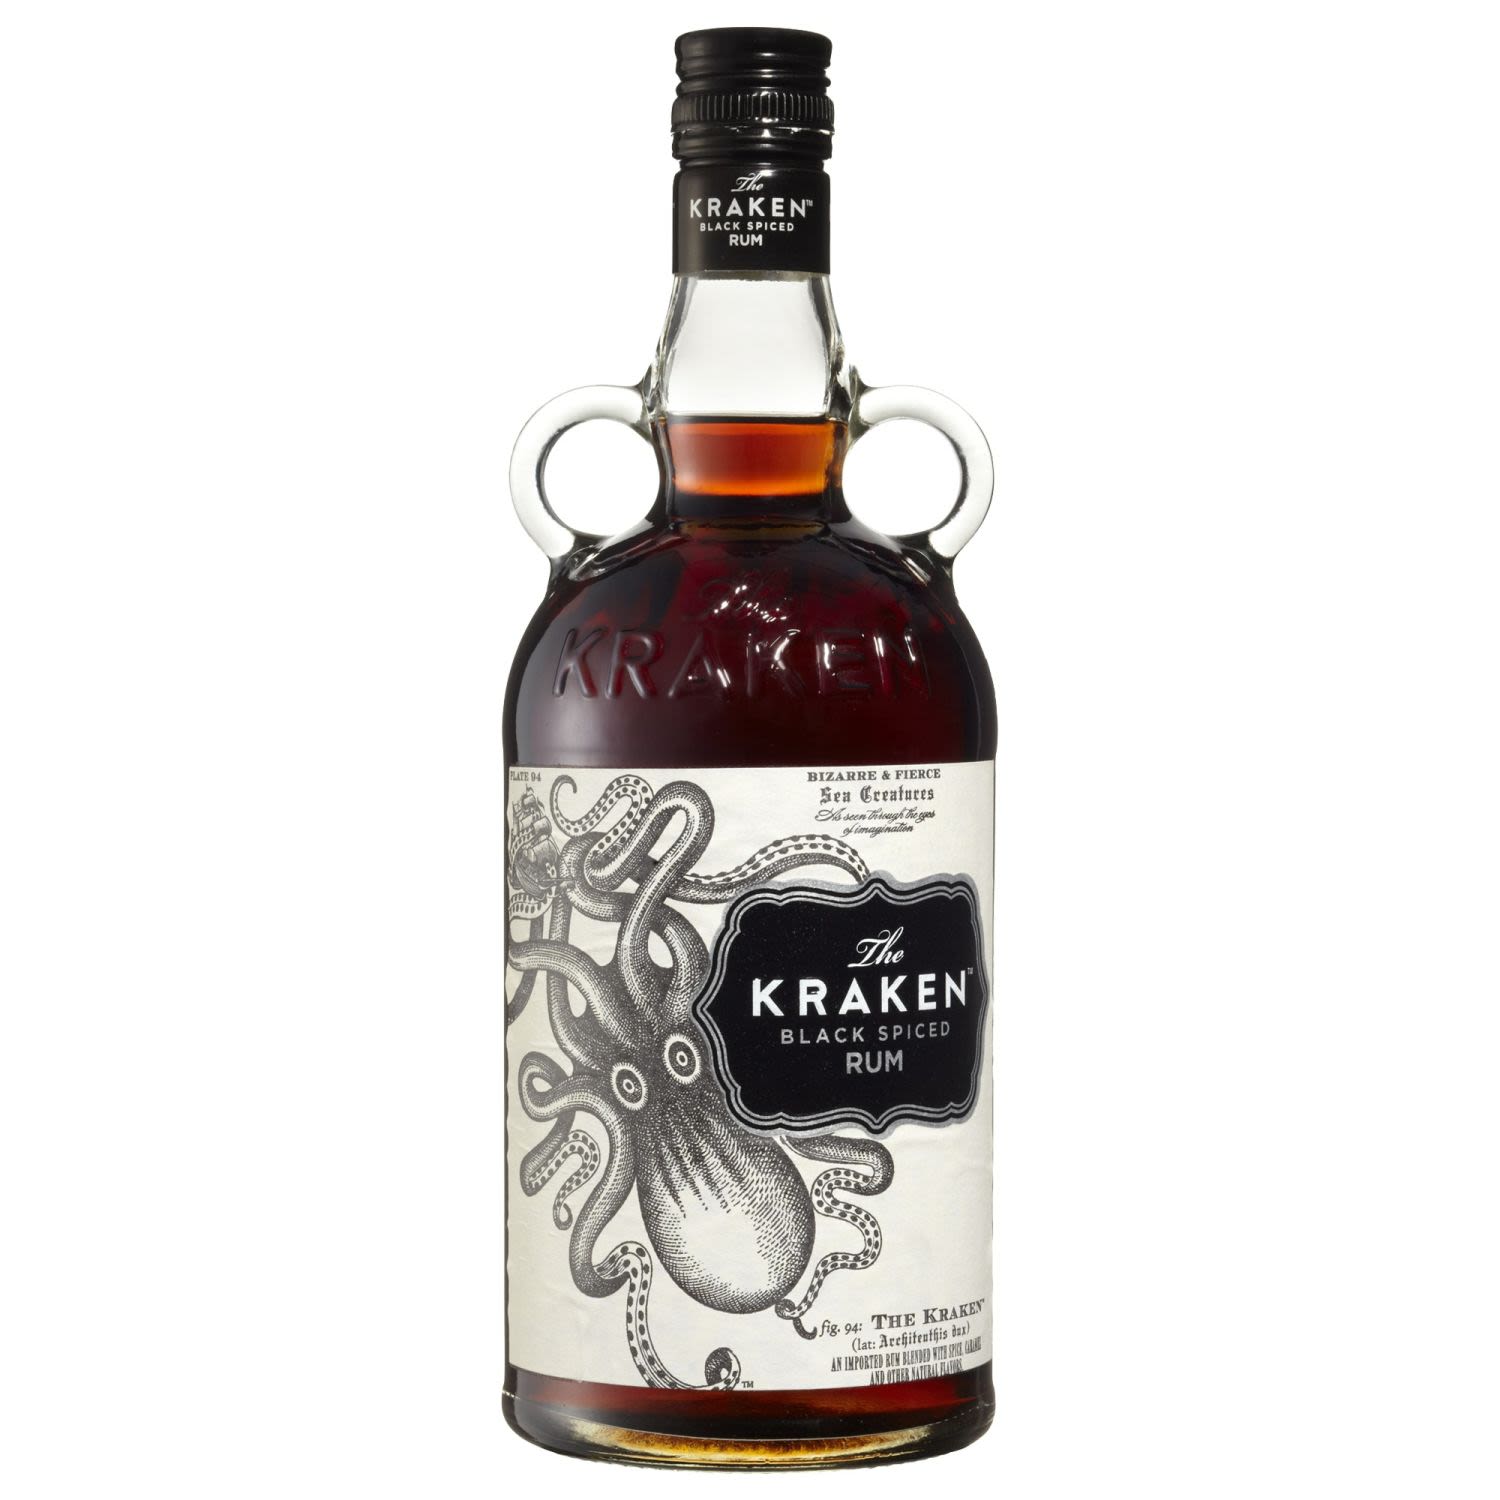 Named after a sea beast of myth and legend, The Kraken is unique Caribbean black spiced rum. Enriched with exotic spice notes of ginger, cinnamon and clove. The rich black colour takes its hue from the mysterious ink with which, as legend has it, The Kraken, a beast of epic proportions, covered its prey. While the smooth taste of the Kraken Rum lends itself to be enjoyed as sipping rum, it also tastes great as a key ingredient in a number of rum based cocktails, such as a traditional Kraken & Cola.<br /> <br />Alcohol Volume: 40.00%<br /><br />Pack Format: Bottle<br /><br />Standard Drinks: 22<br /><br />Pack Type: Bottle<br /><br />Country of Origin: USA<br />